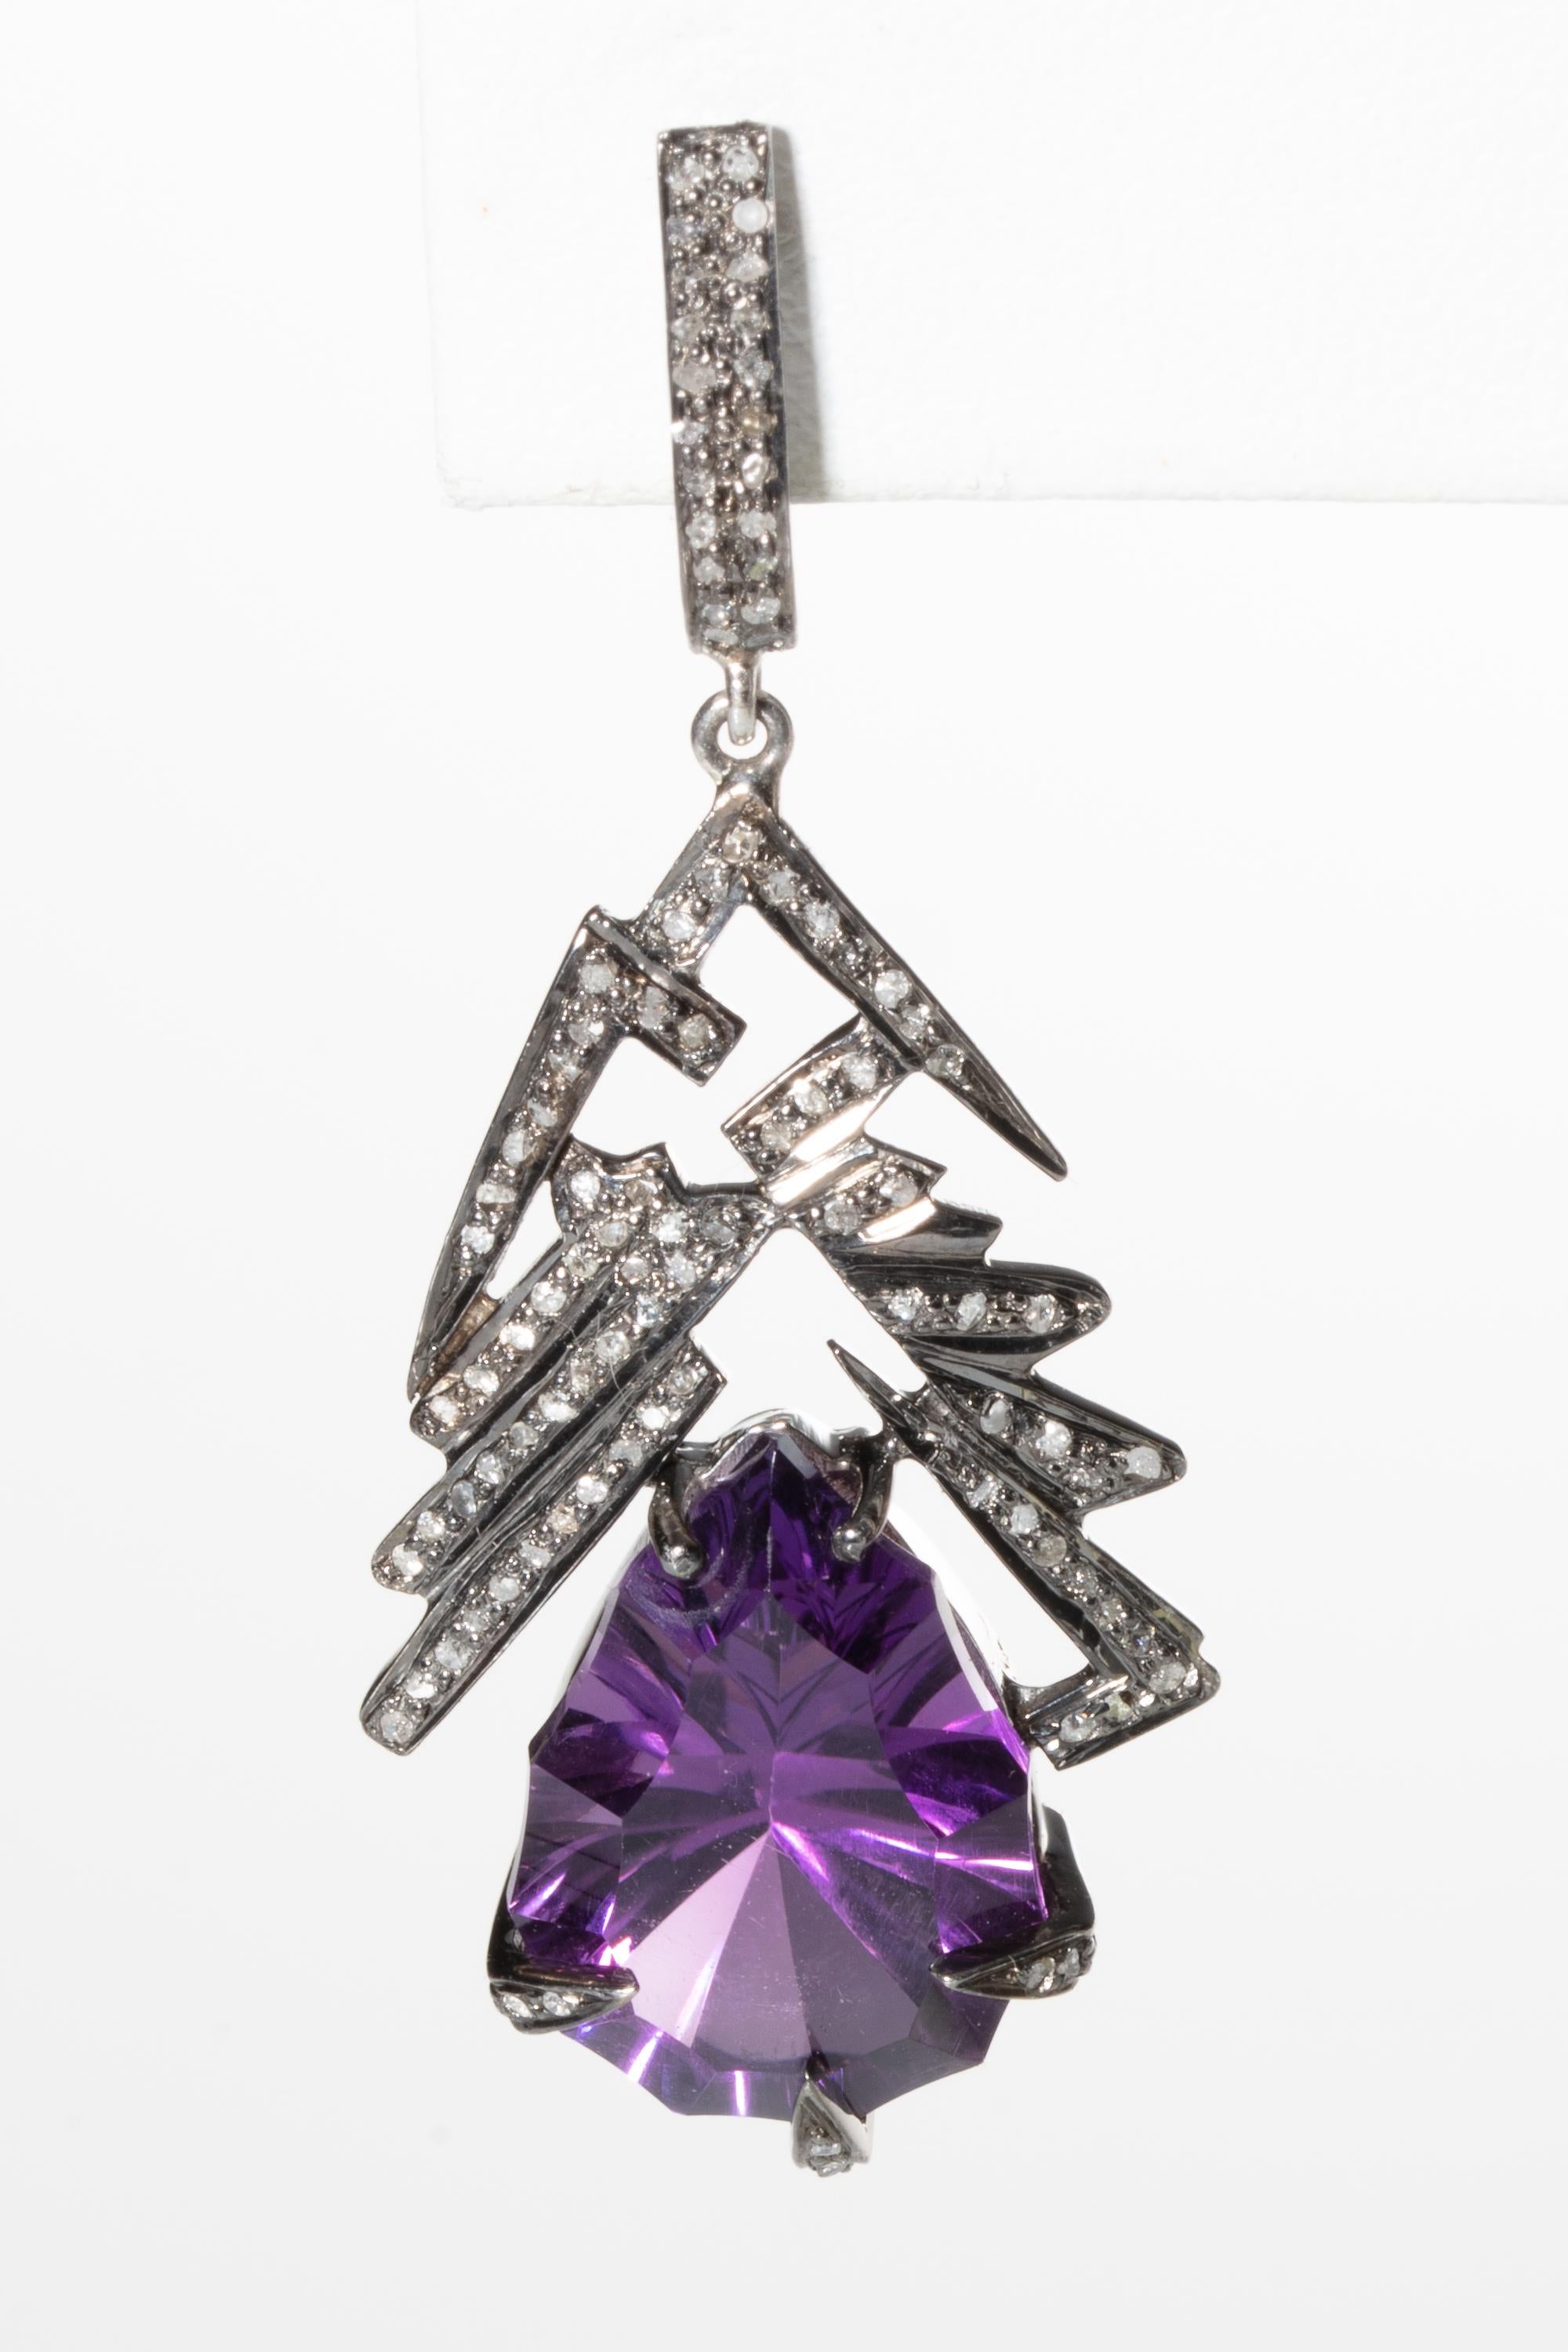 Unusually cut pear-shaped large amethyst drops suspended from a stylized Art Deco configuration of pave-set diamonds set in an oxidized sterling silver.  Sterling silver and diamond loop post for pierced ears.  Weight of diamonds is .75 carats,